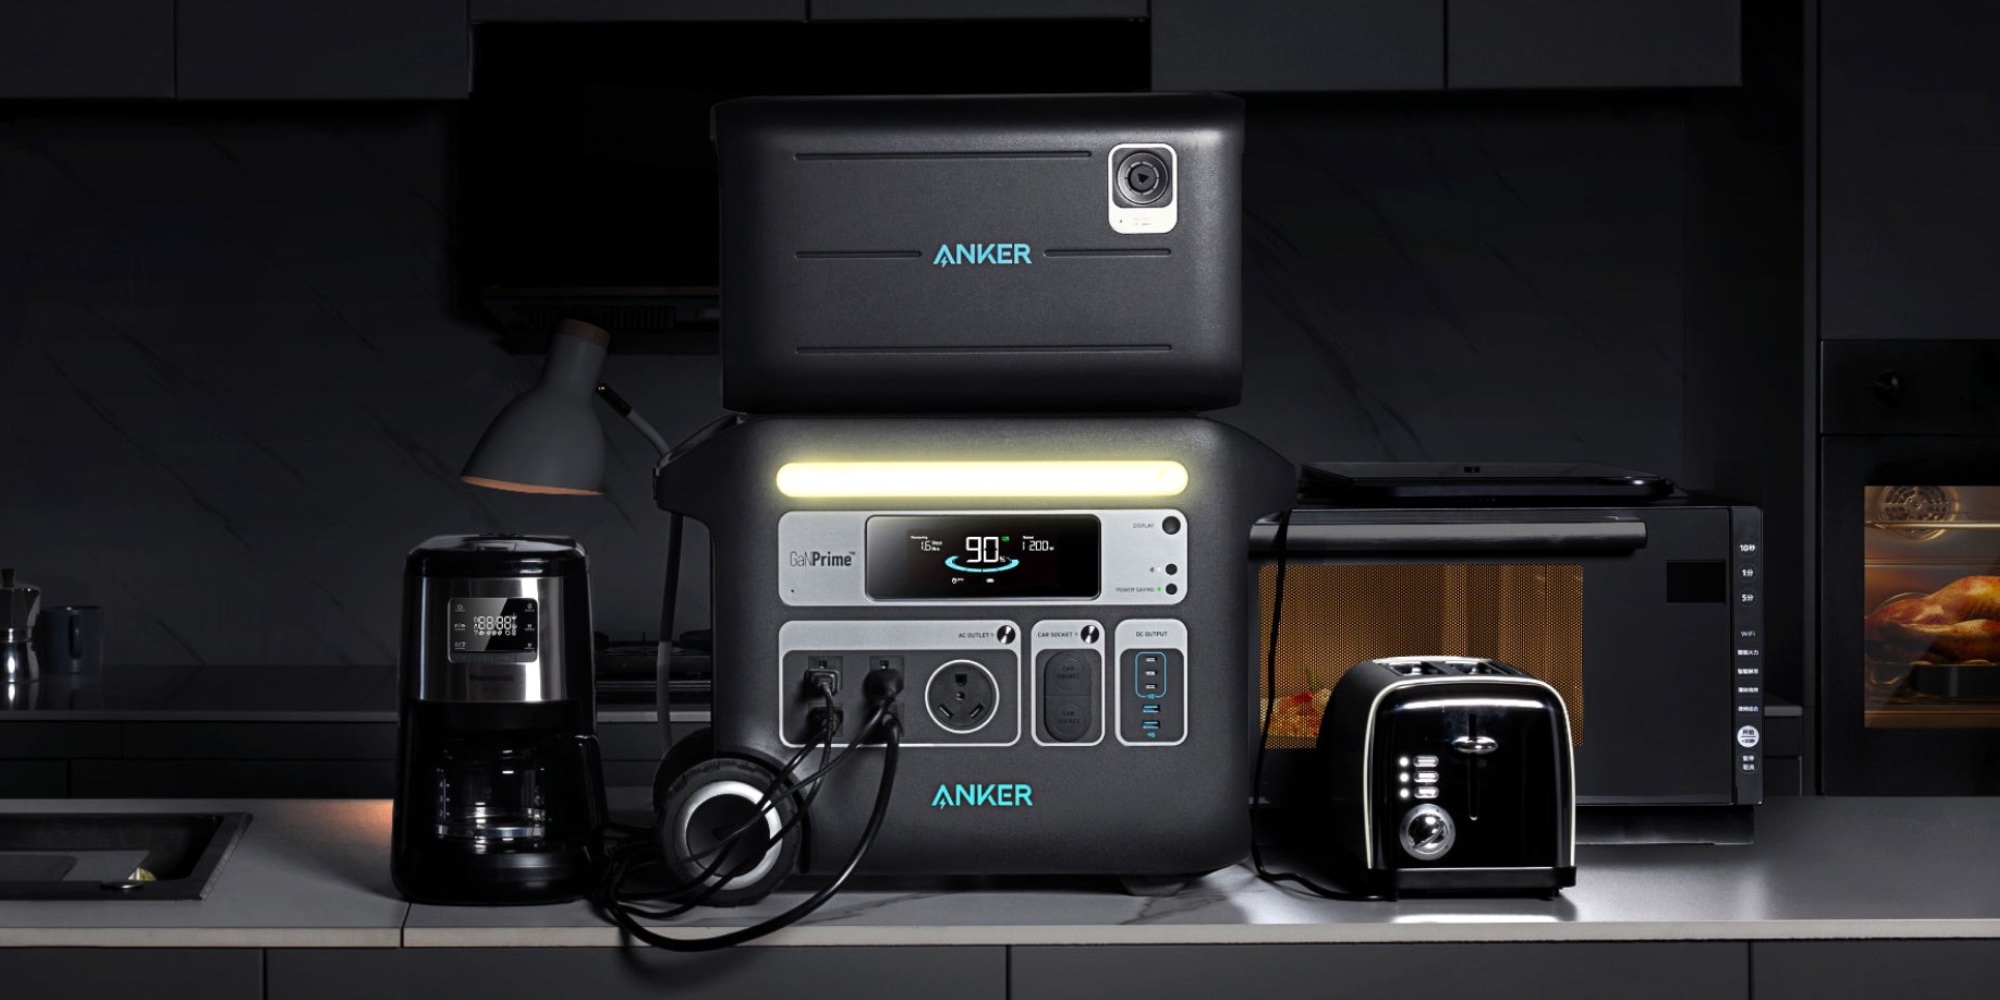 Save $350 or more on Anker's latest PowerHouse 767 GaNPrime power